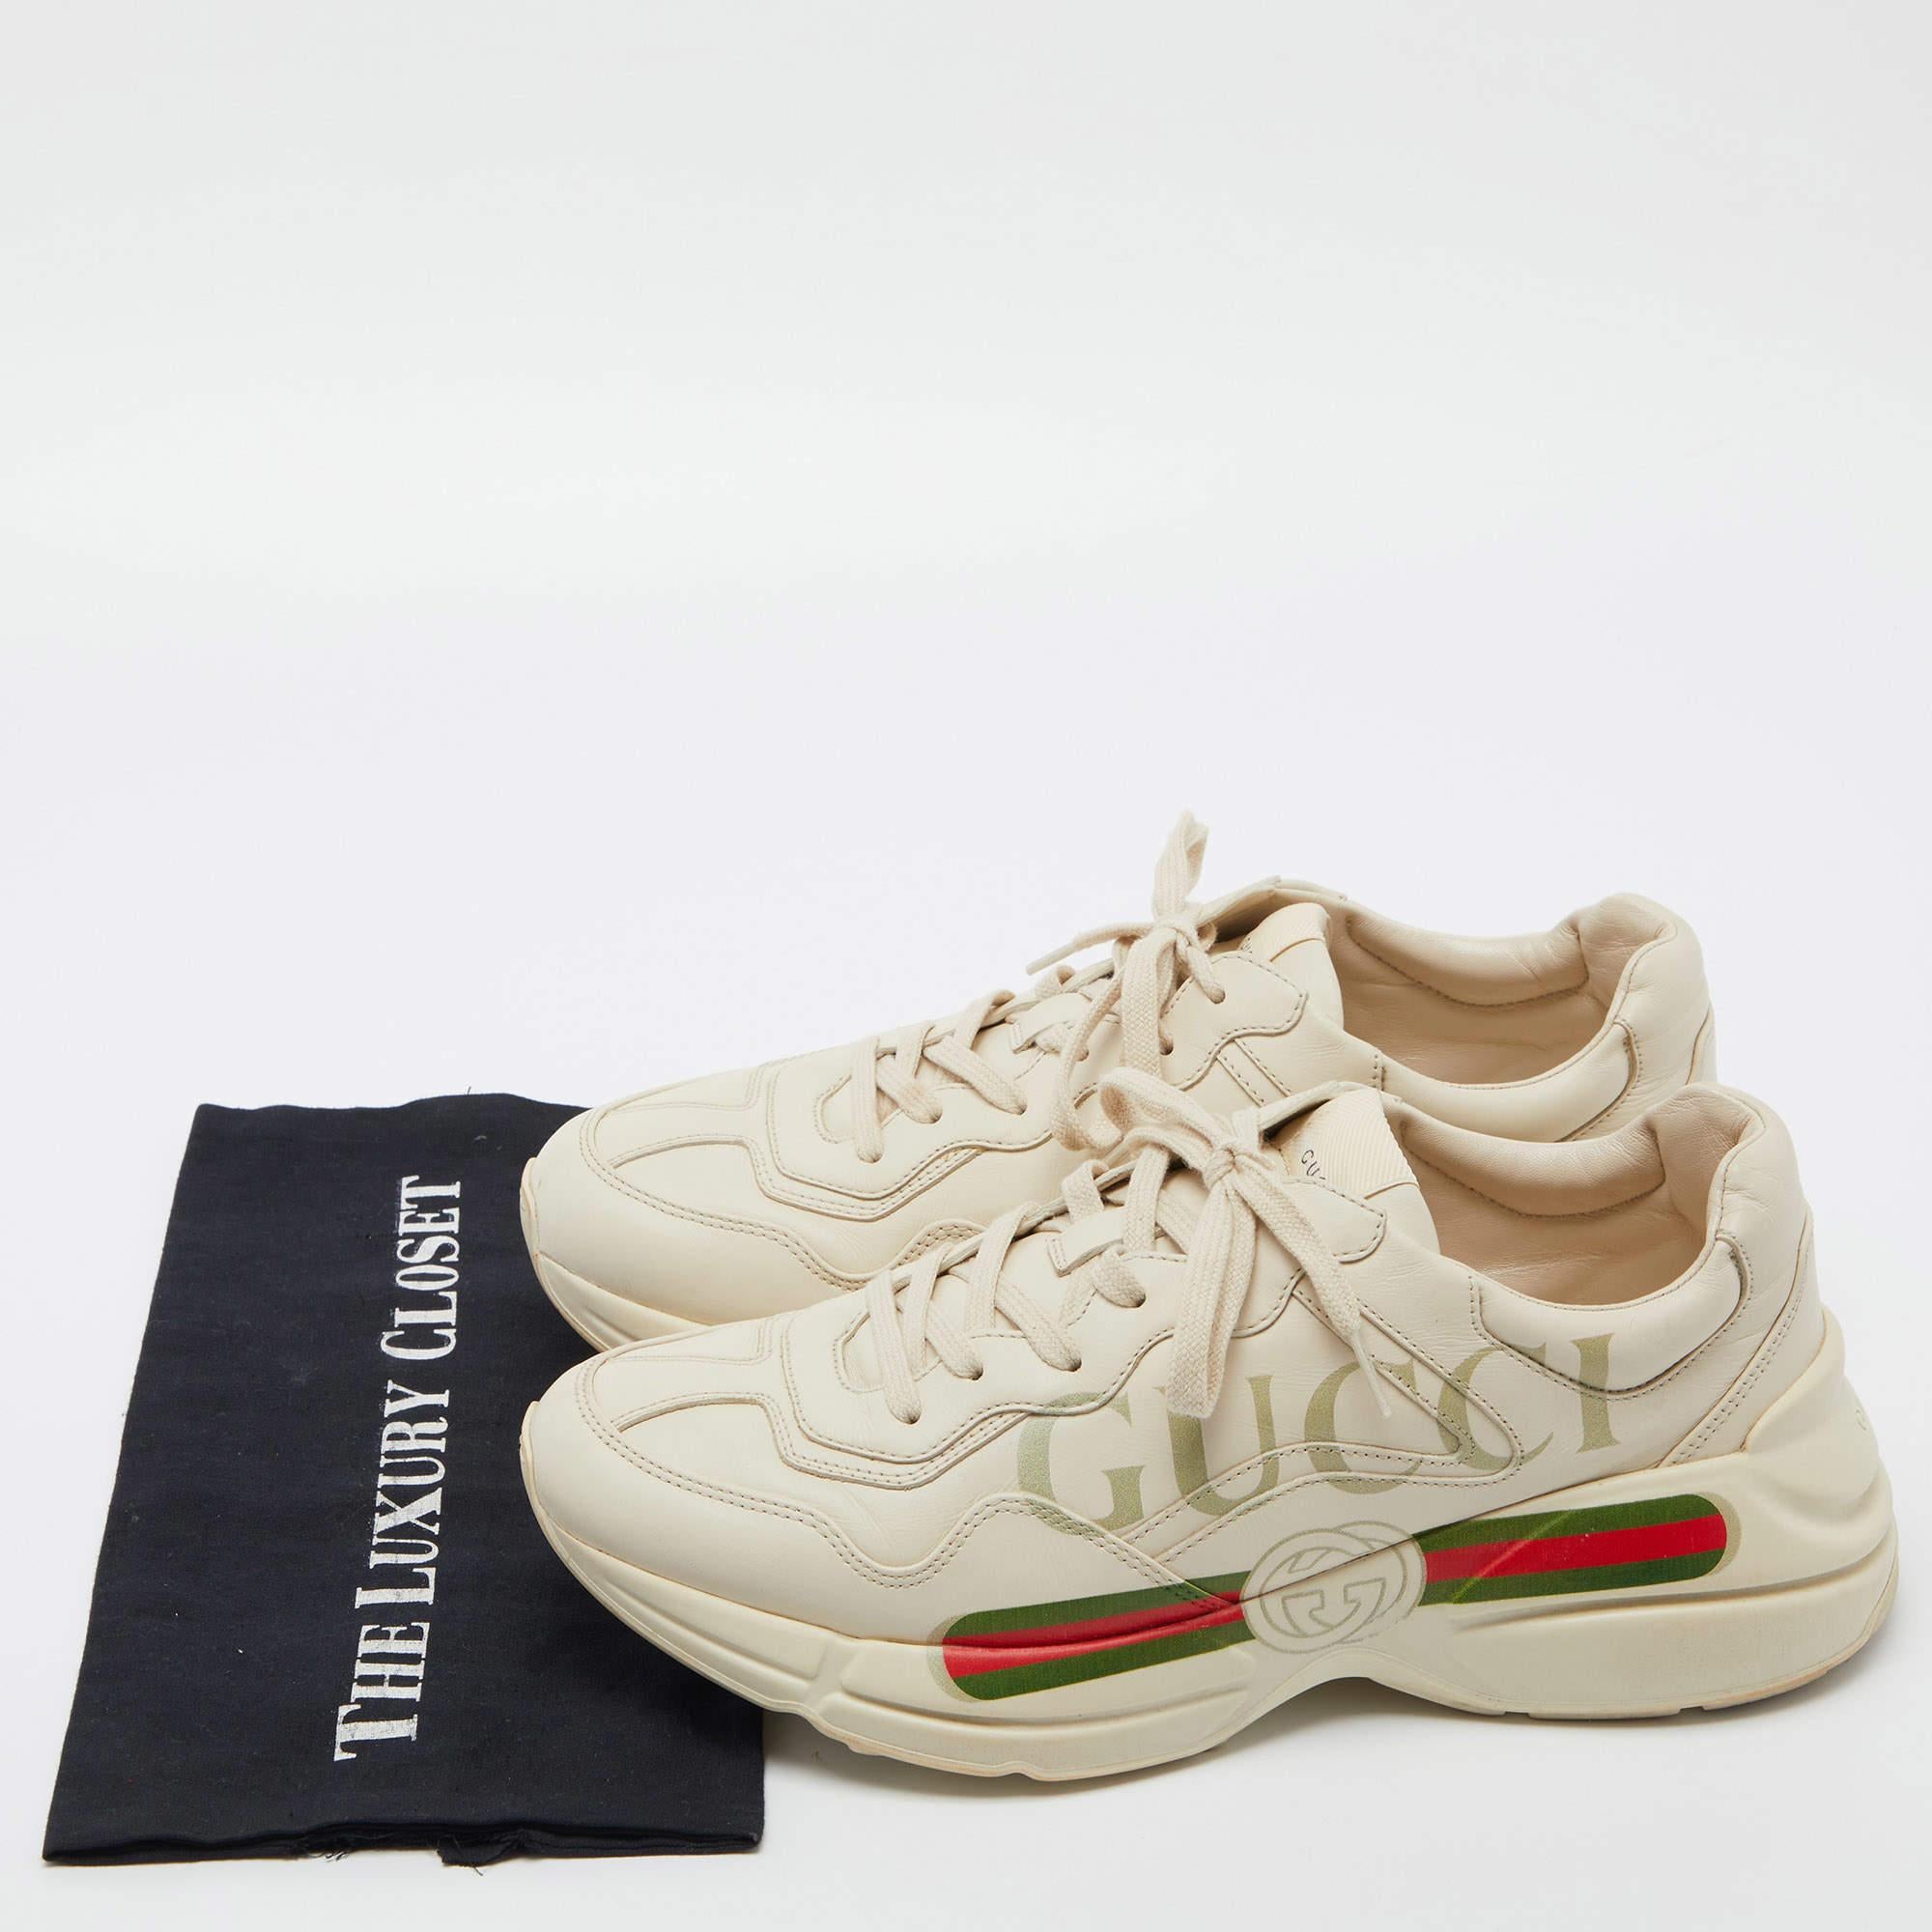 Gucci Beige Leather Rhyton Vintage Logo Low Top Sneakers Size 43 5